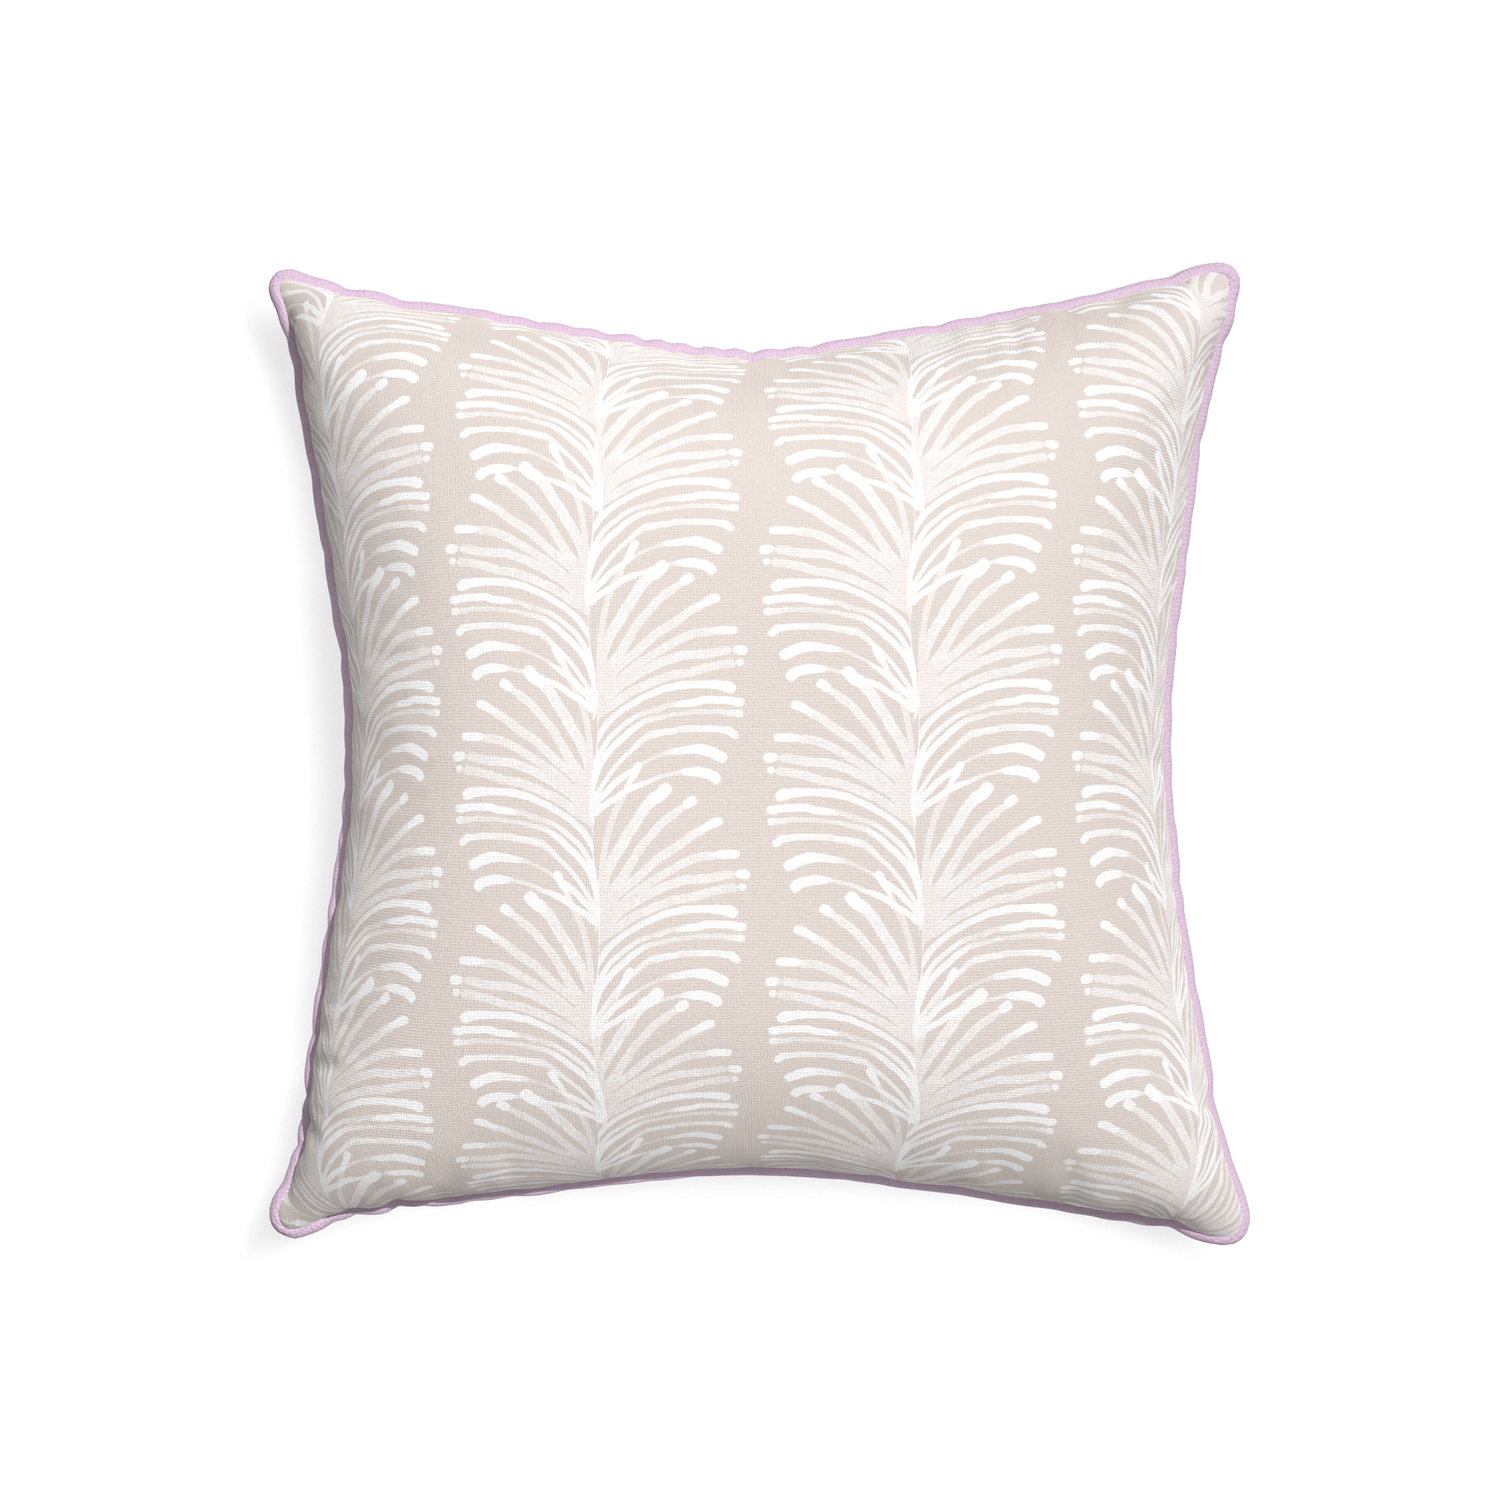 22-square emma sand custom sand colored botanical stripepillow with l piping on white background